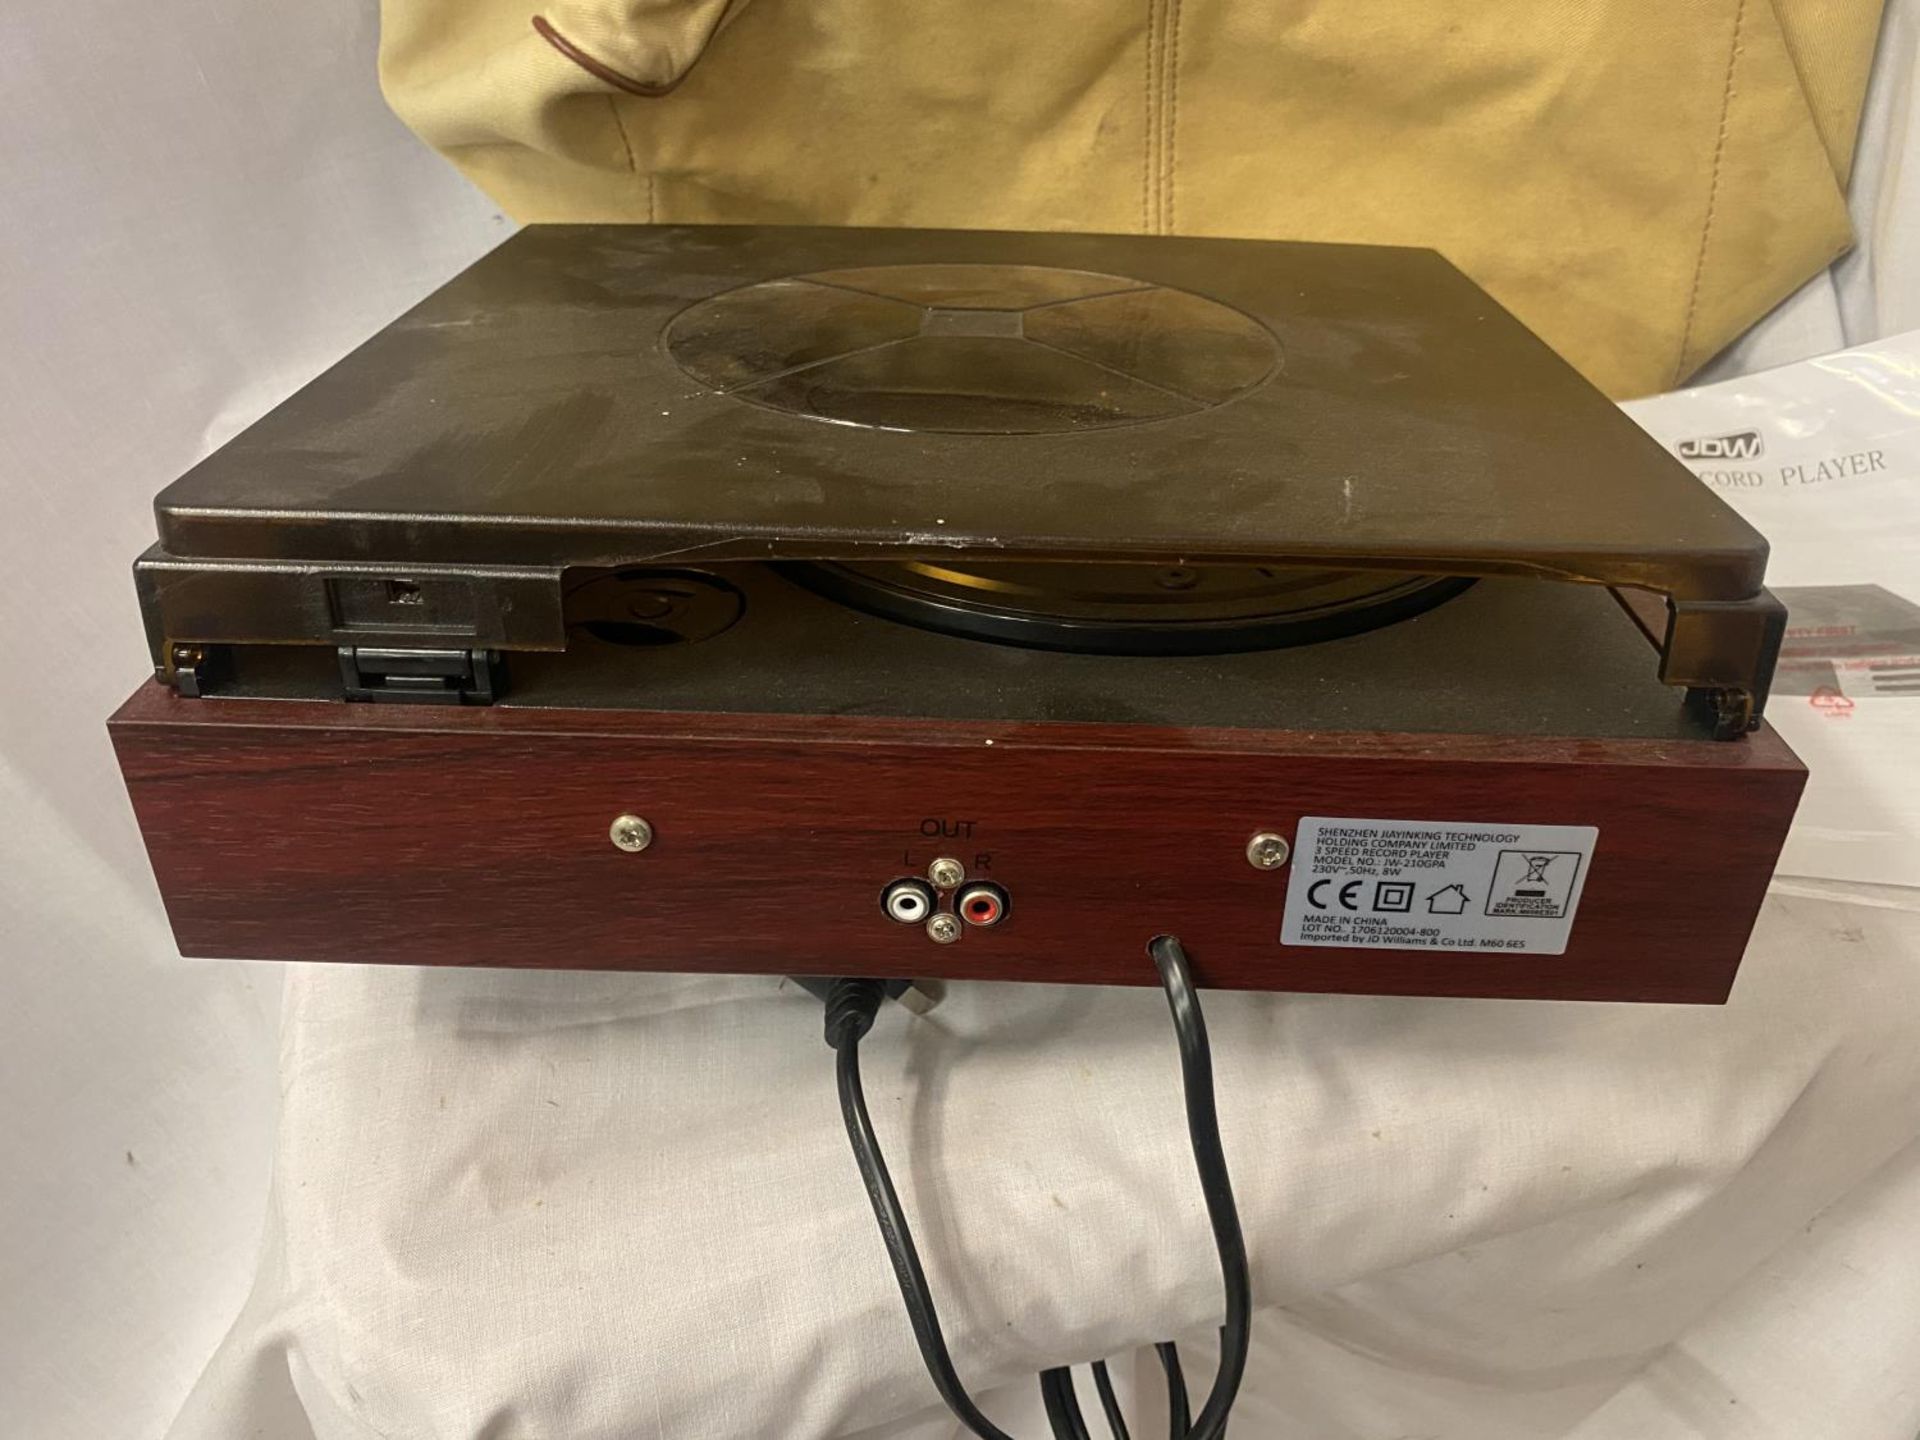 A JDW RECORD PLAYER - Image 6 of 6